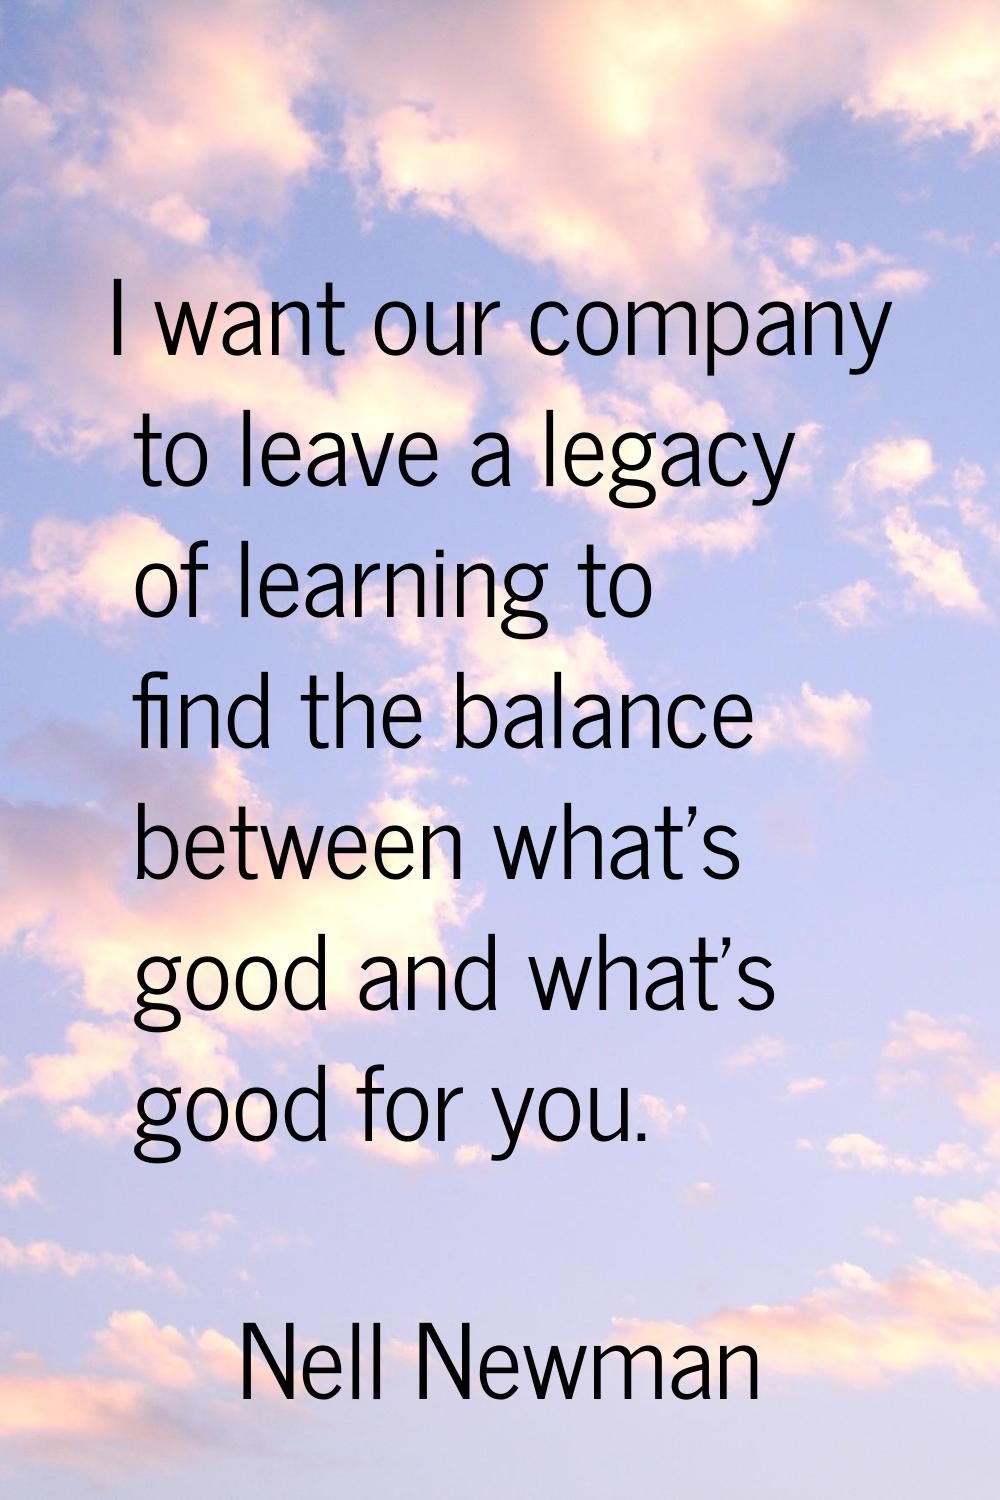 I want our company to leave a legacy of learning to find the balance between what's good and what's